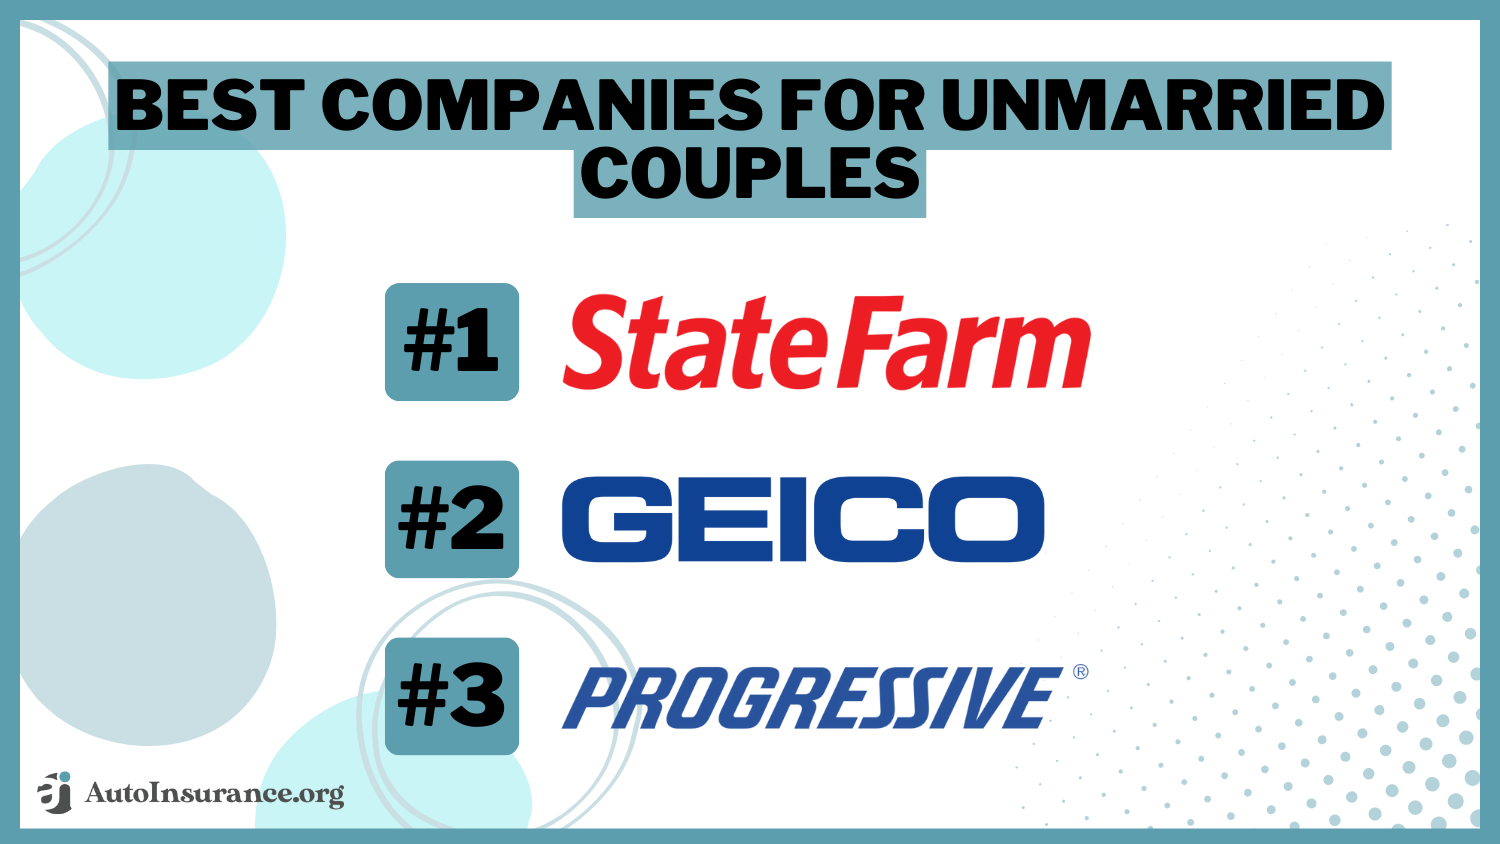 Best Companies for Unmarried Couples: State Farm, Geico, Progressive 